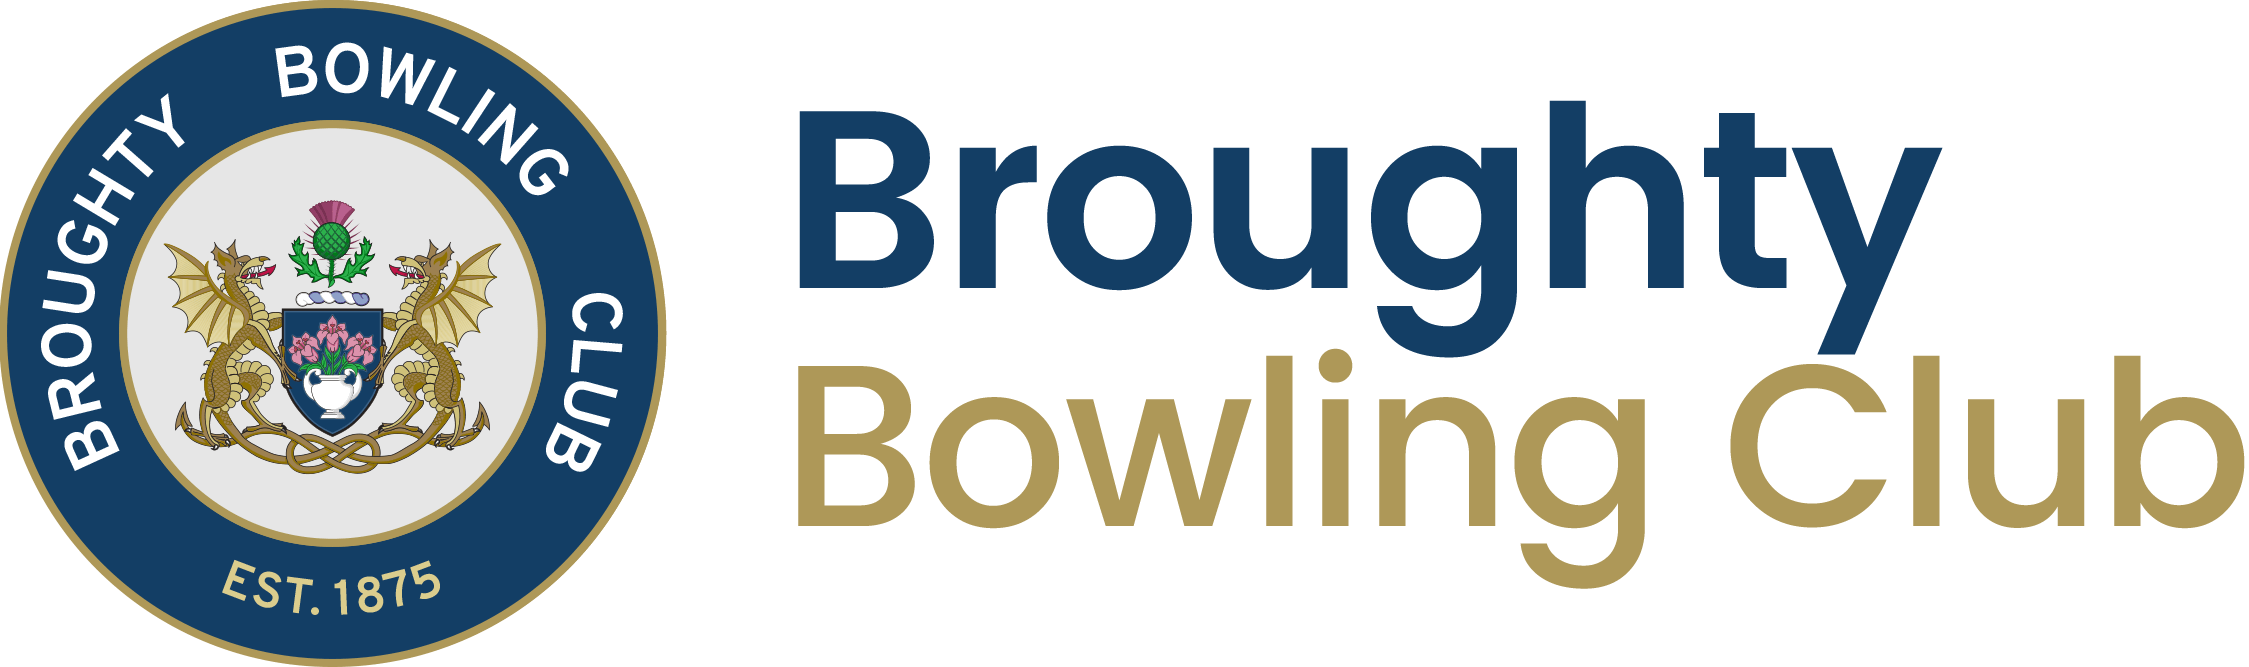 Broughty Bowling Club